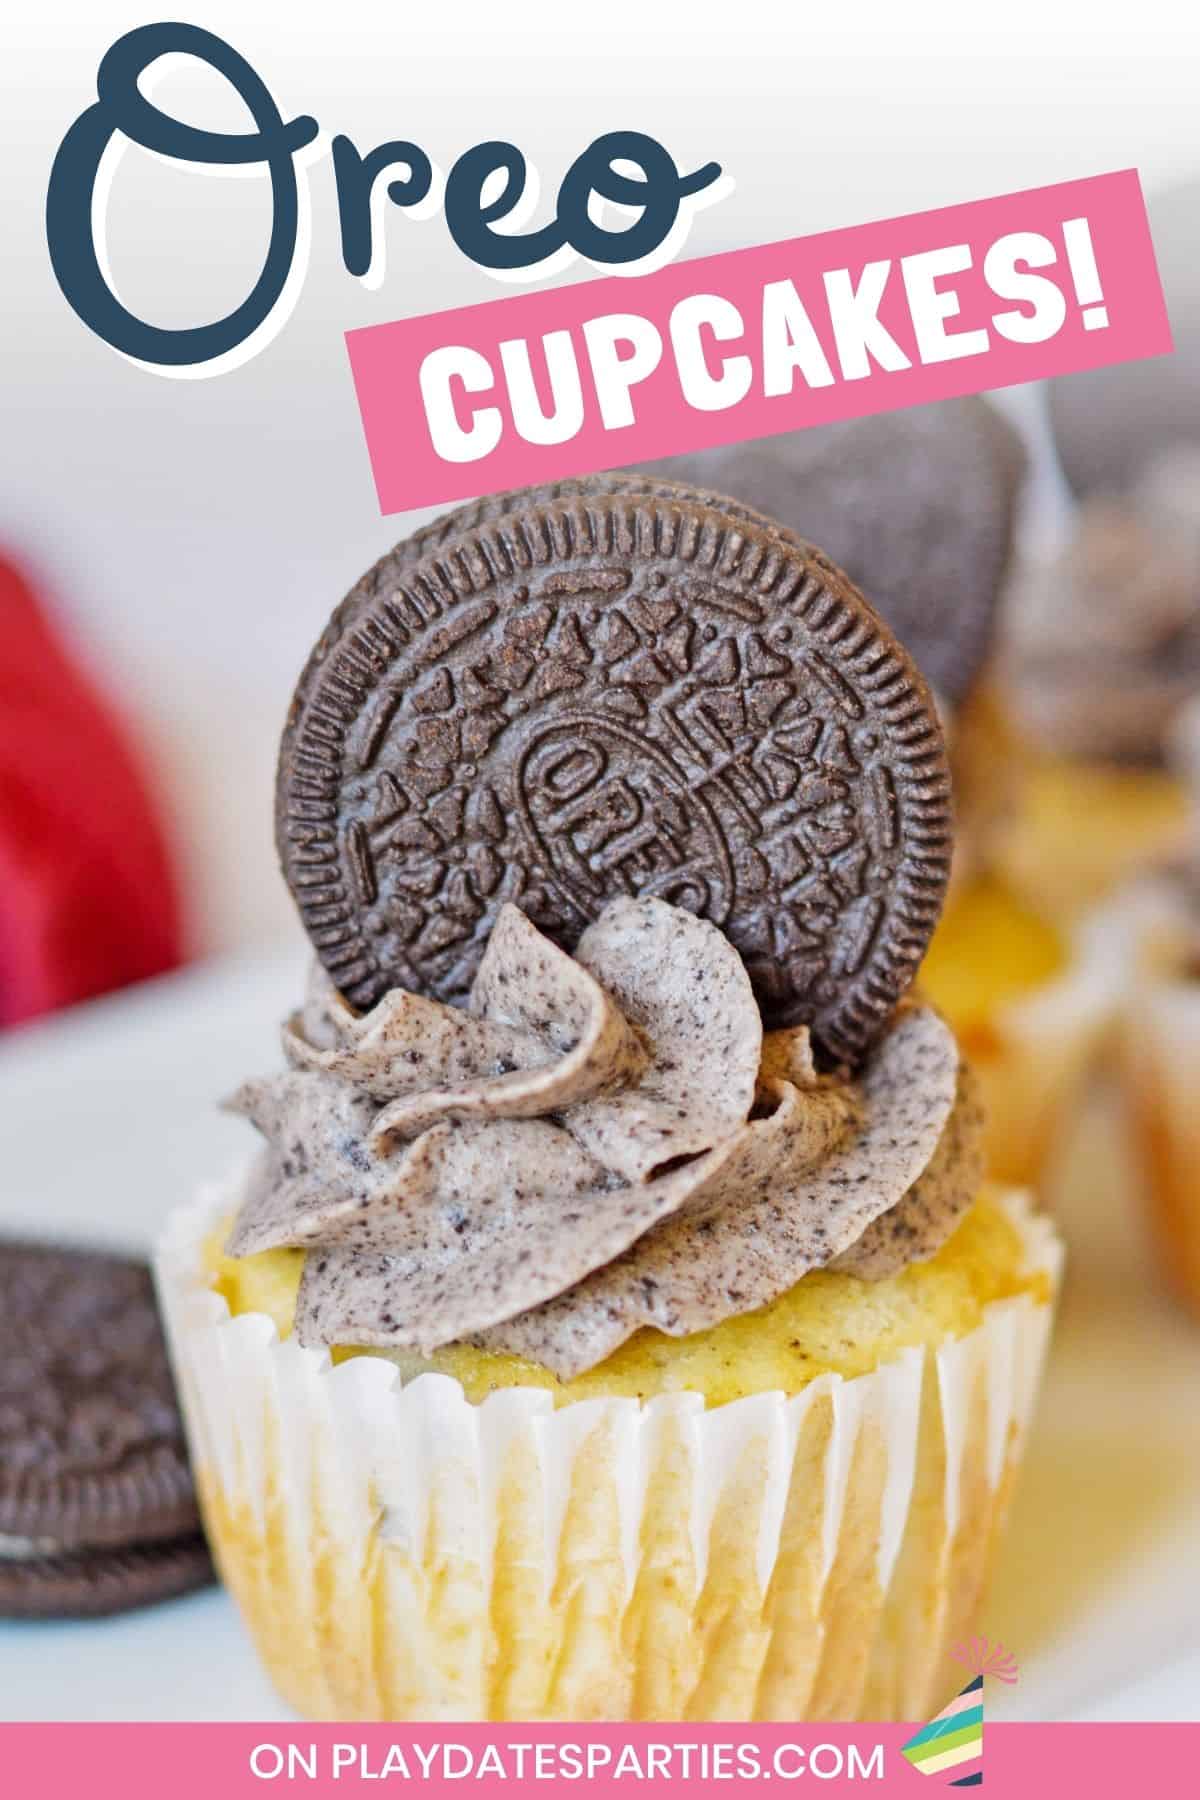 Front view of a cookies and cream cupcake with text overlay Oreo cupcakes!